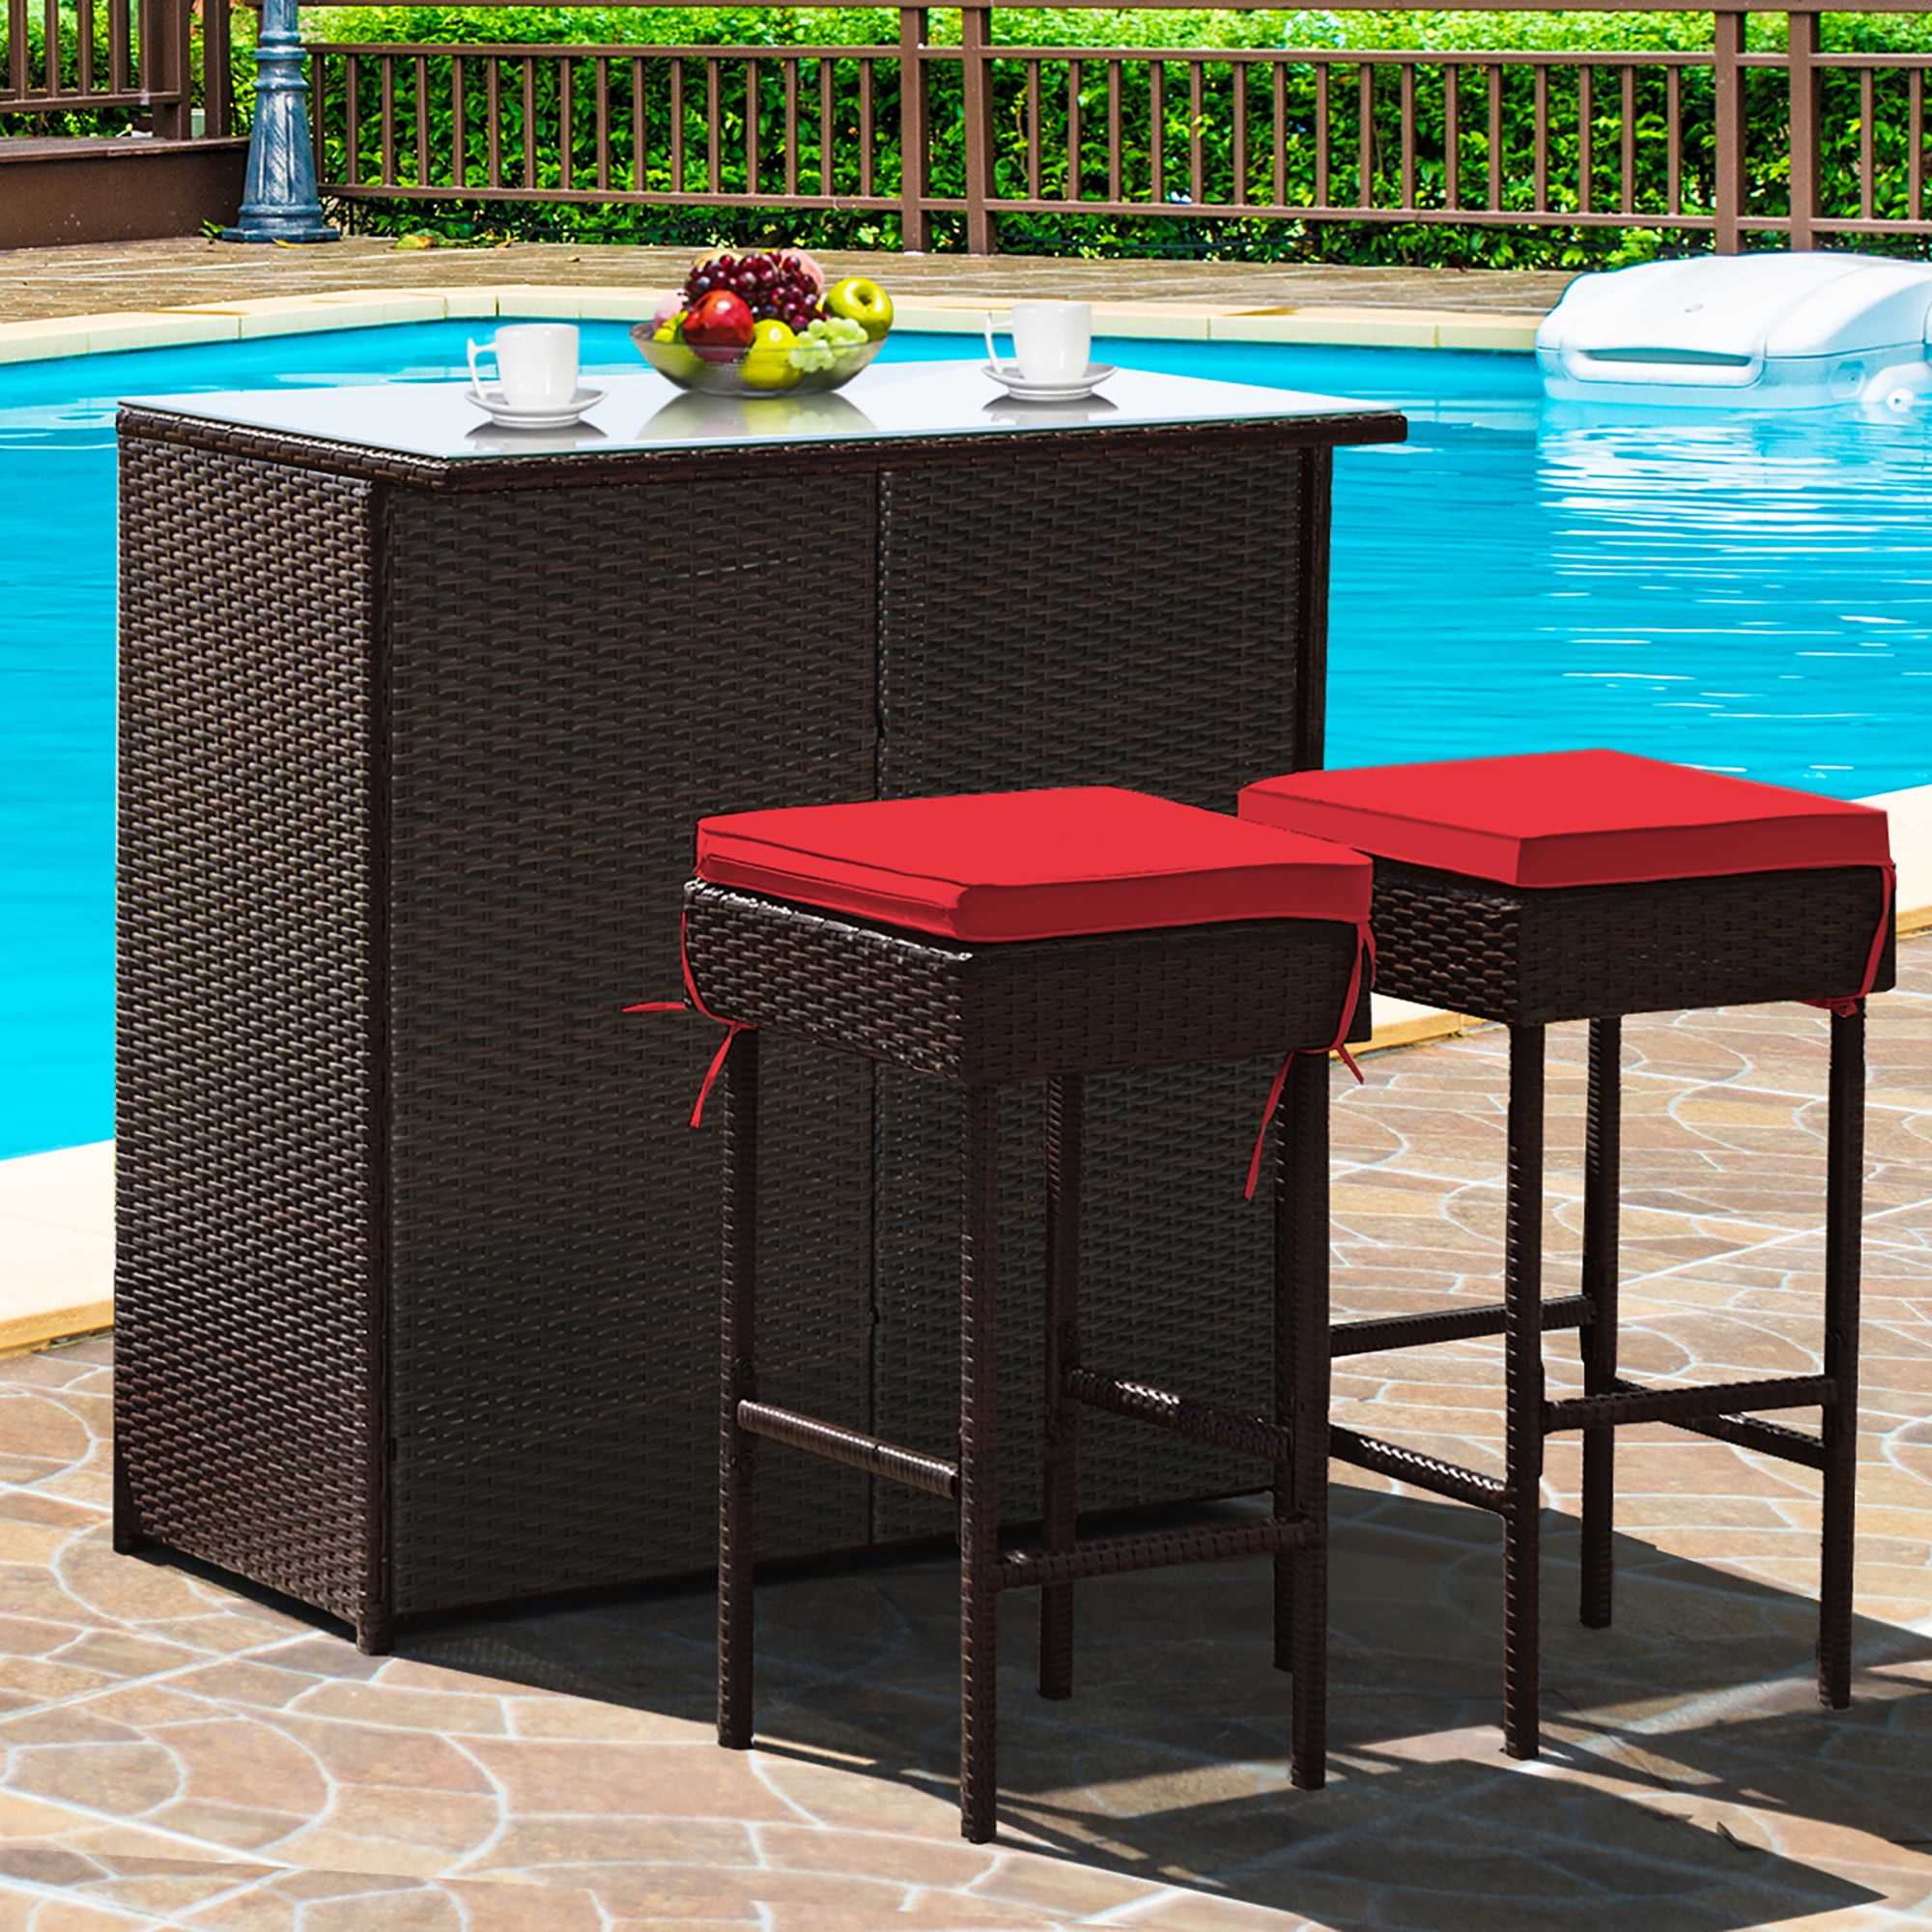 Costway 3pcs Patio Rattan Wicker Bar, Outdoor Wicker Bar Table And Chairs